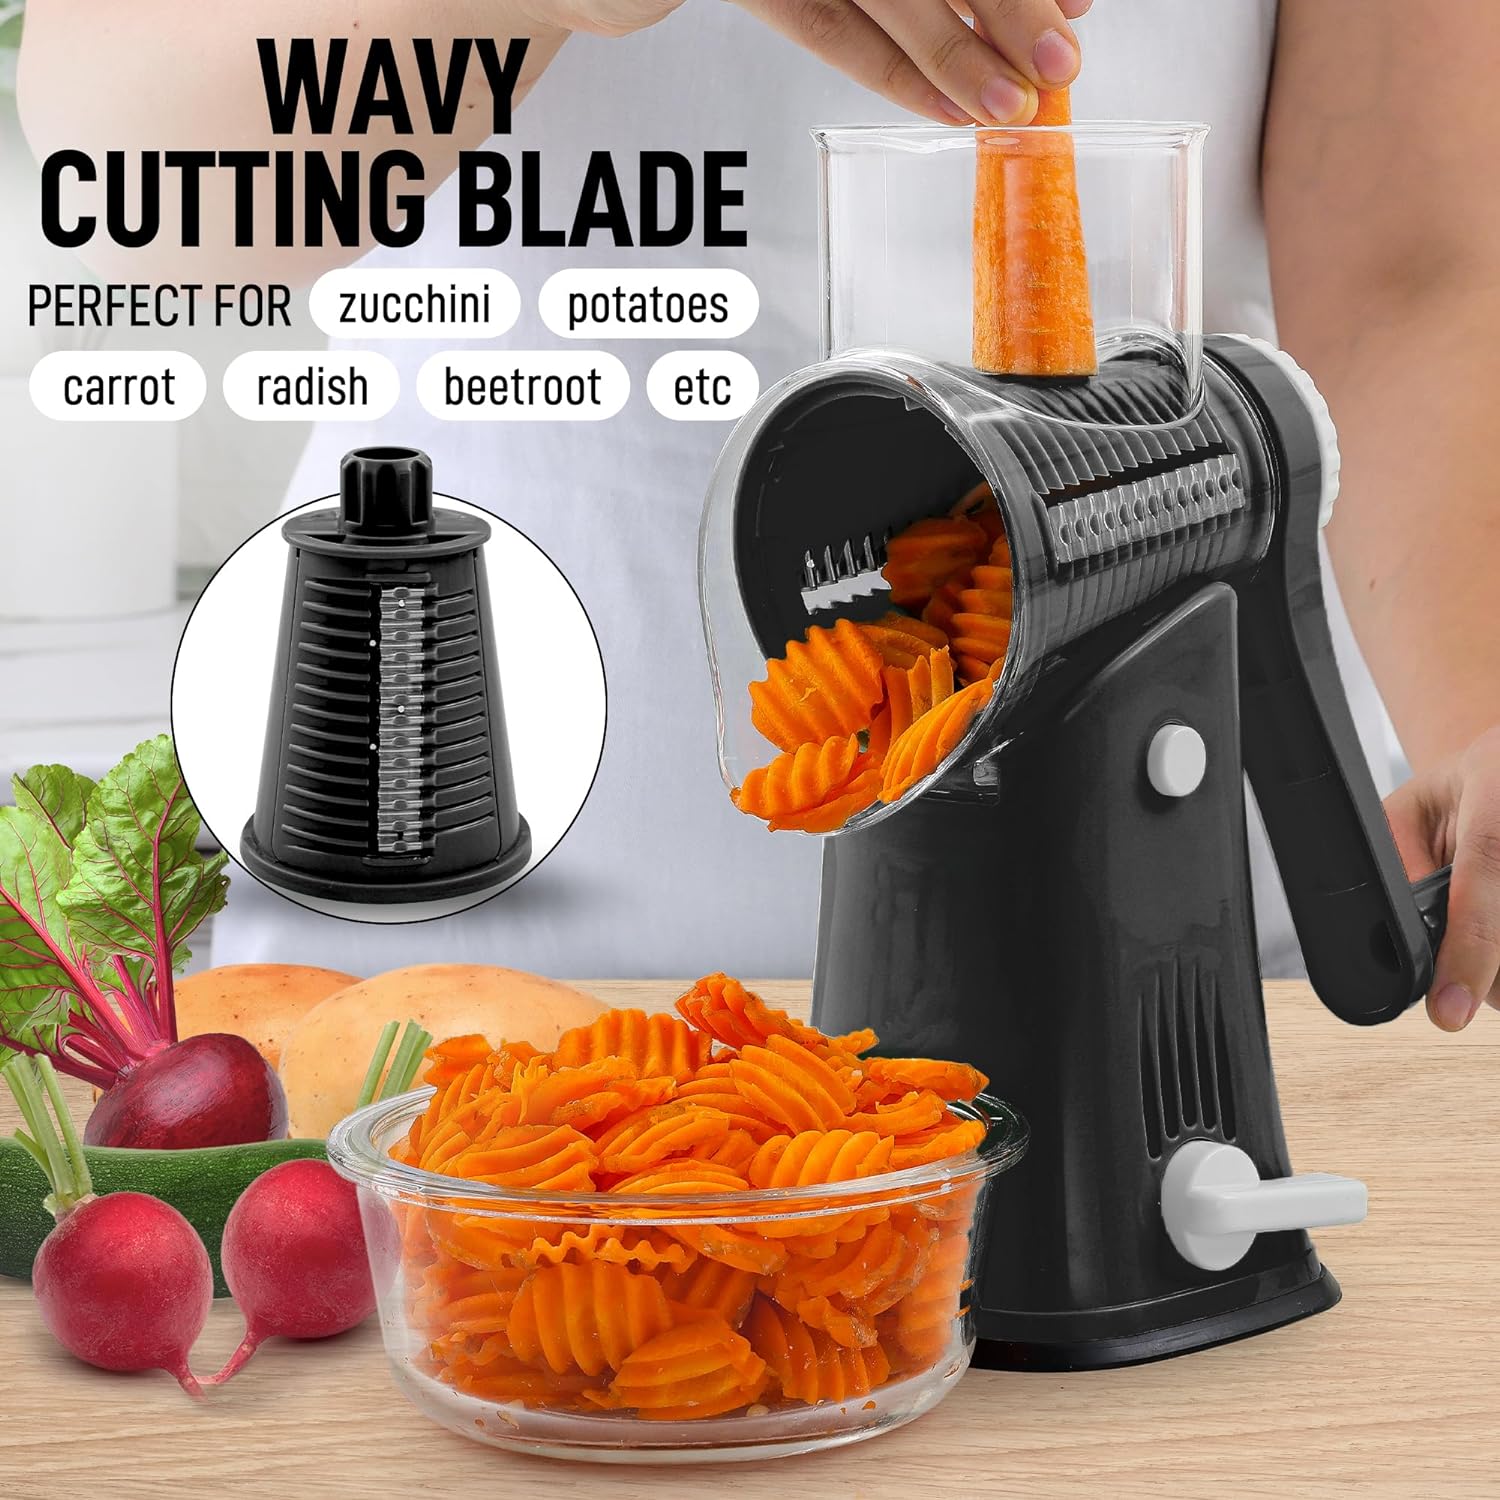 A Home 5 In 1 Rotary Cheese Grater With Handle [5 Interchangeable